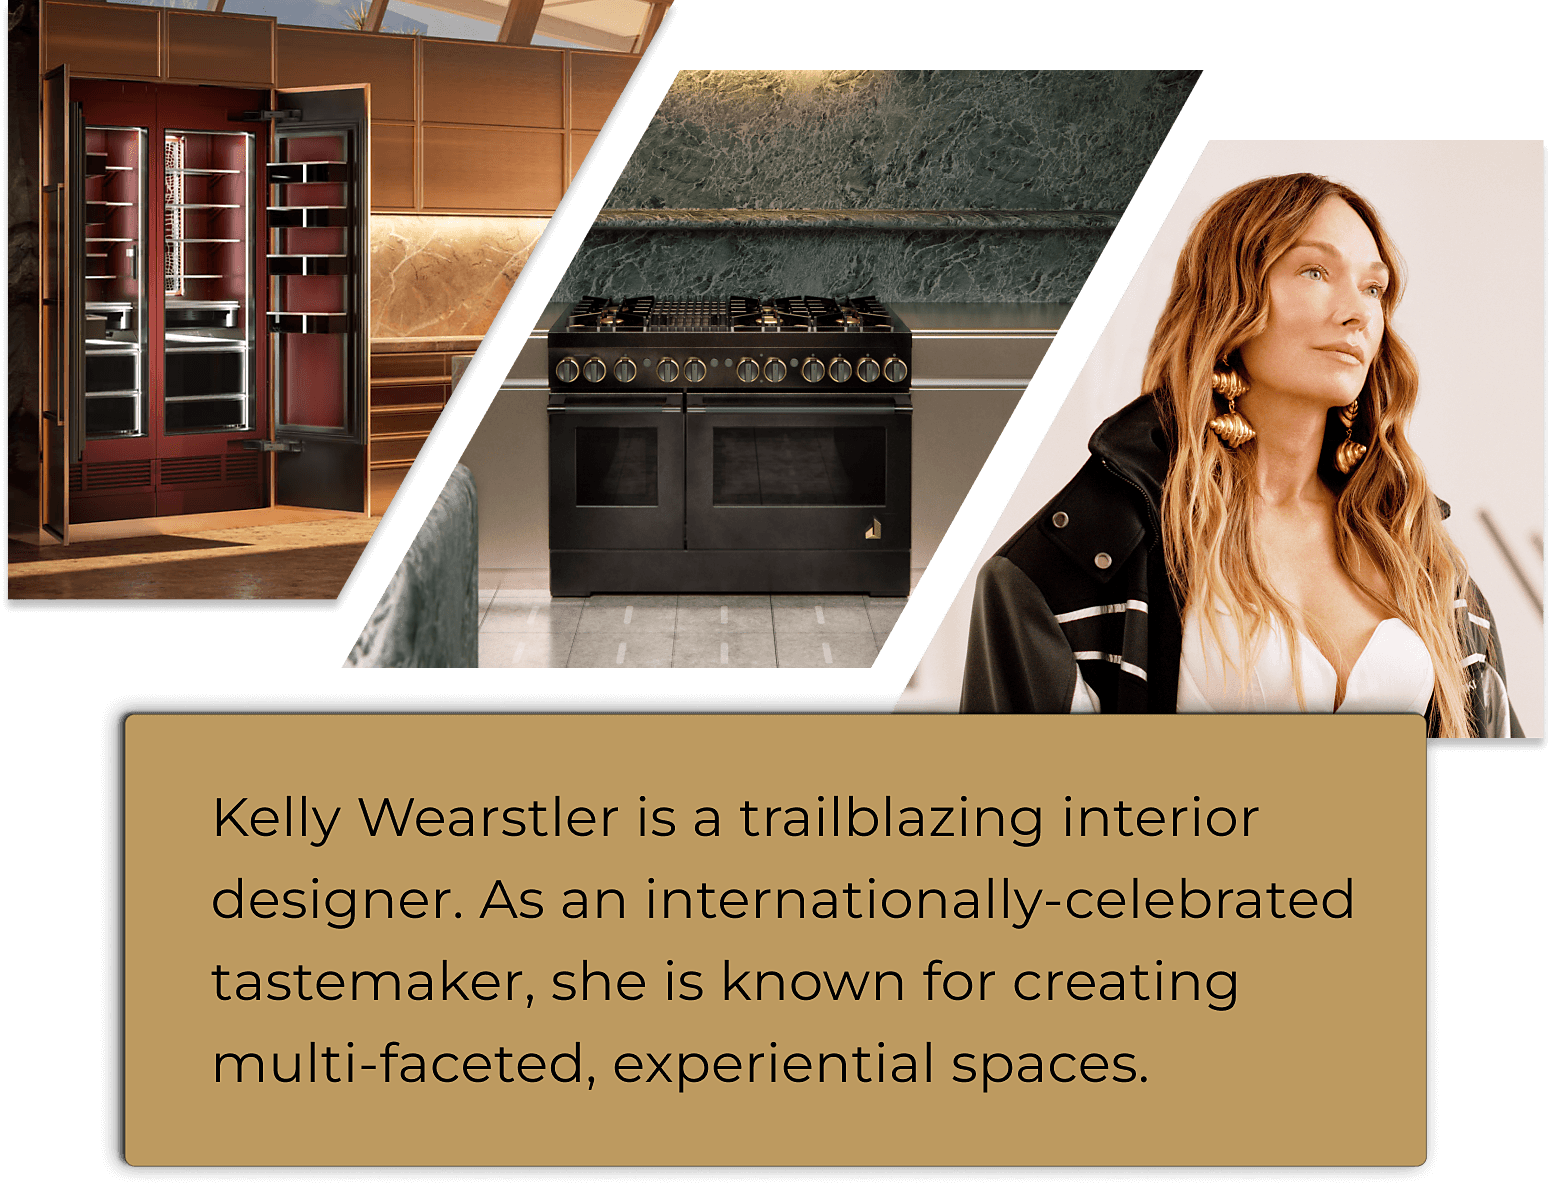 An image of Kelly Wearstler overlayed with one of the kitchen she designed